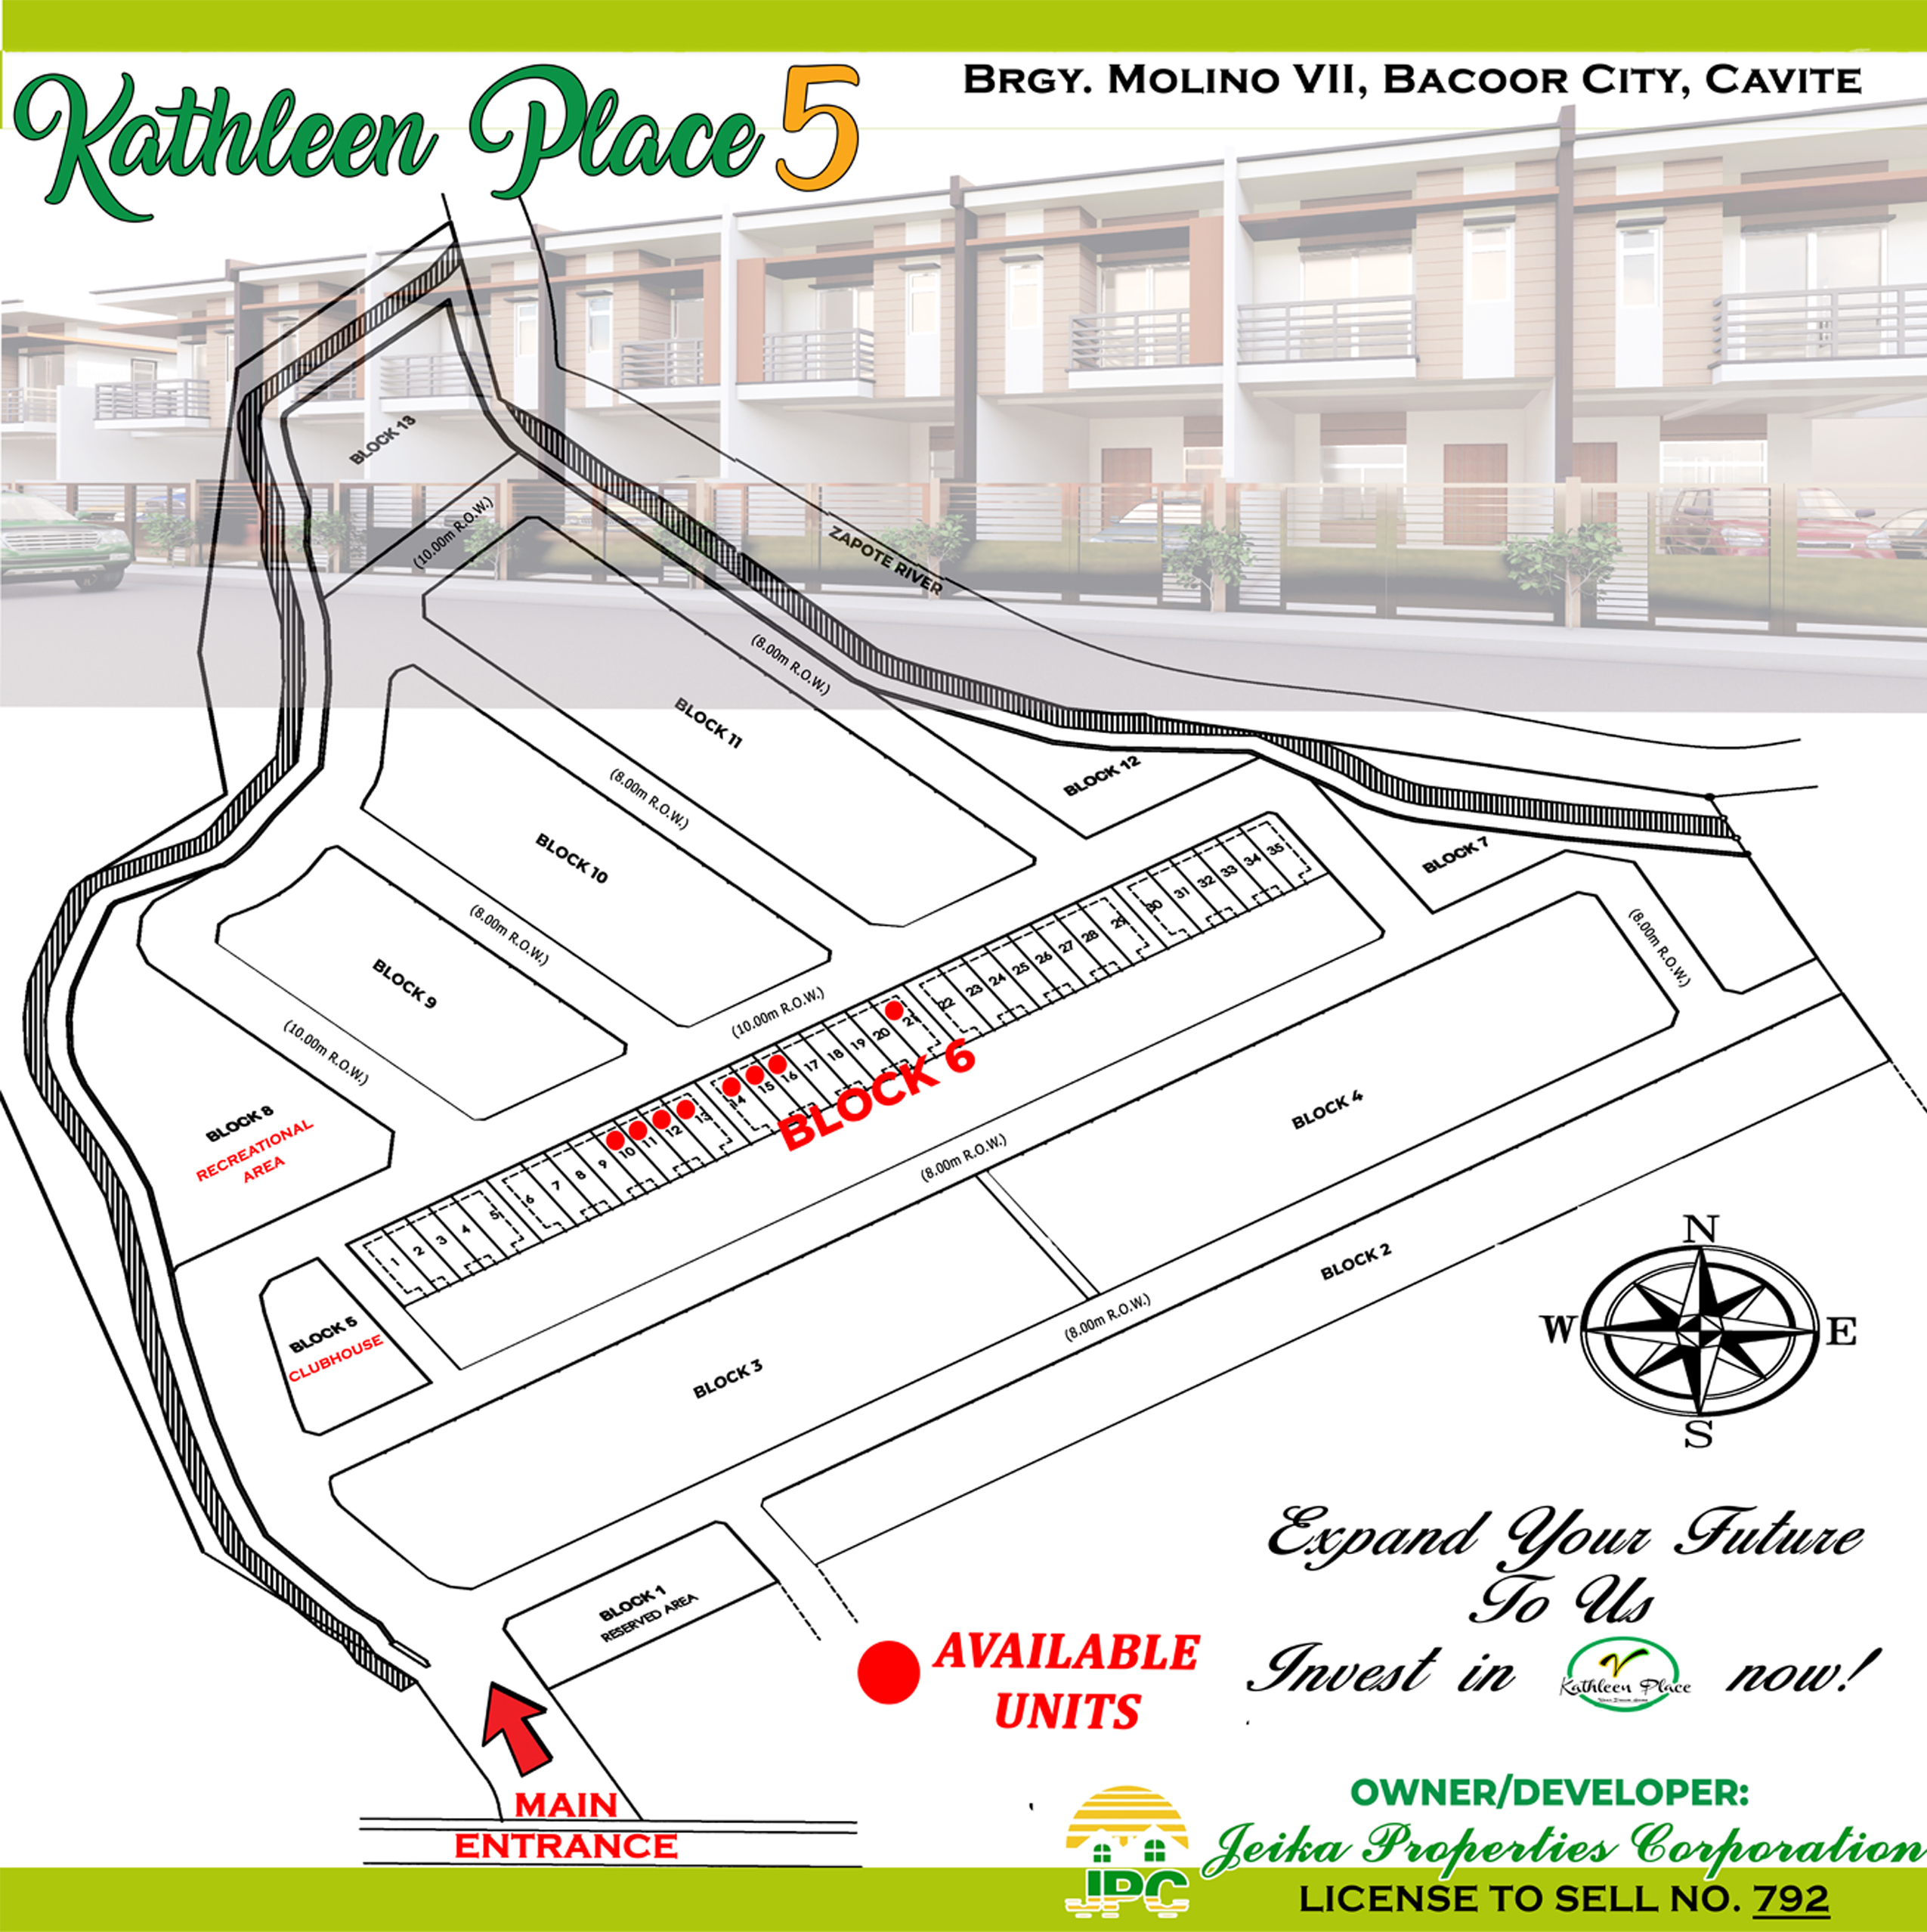 Vicinity Map & Location - Kathleen Place 5 - Inner Unit | Modern House and Lot for Sale Gawaran Bacoor Cavite | Jeika Properties Corporation